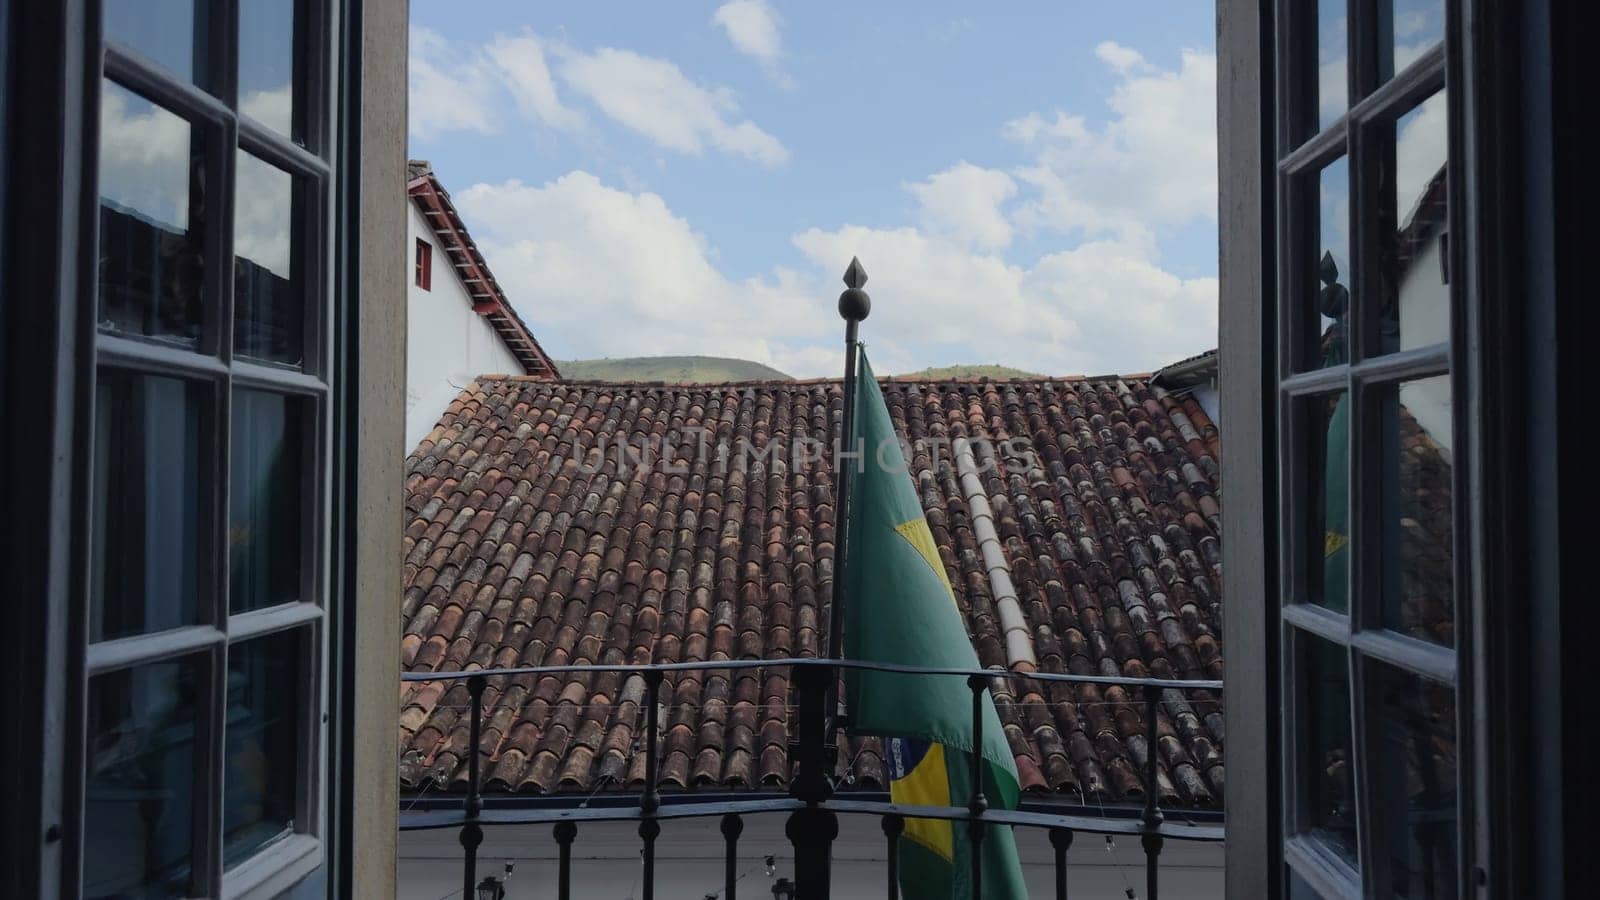 Brazilian flag on a balcony with open doors, building's roof in the background.